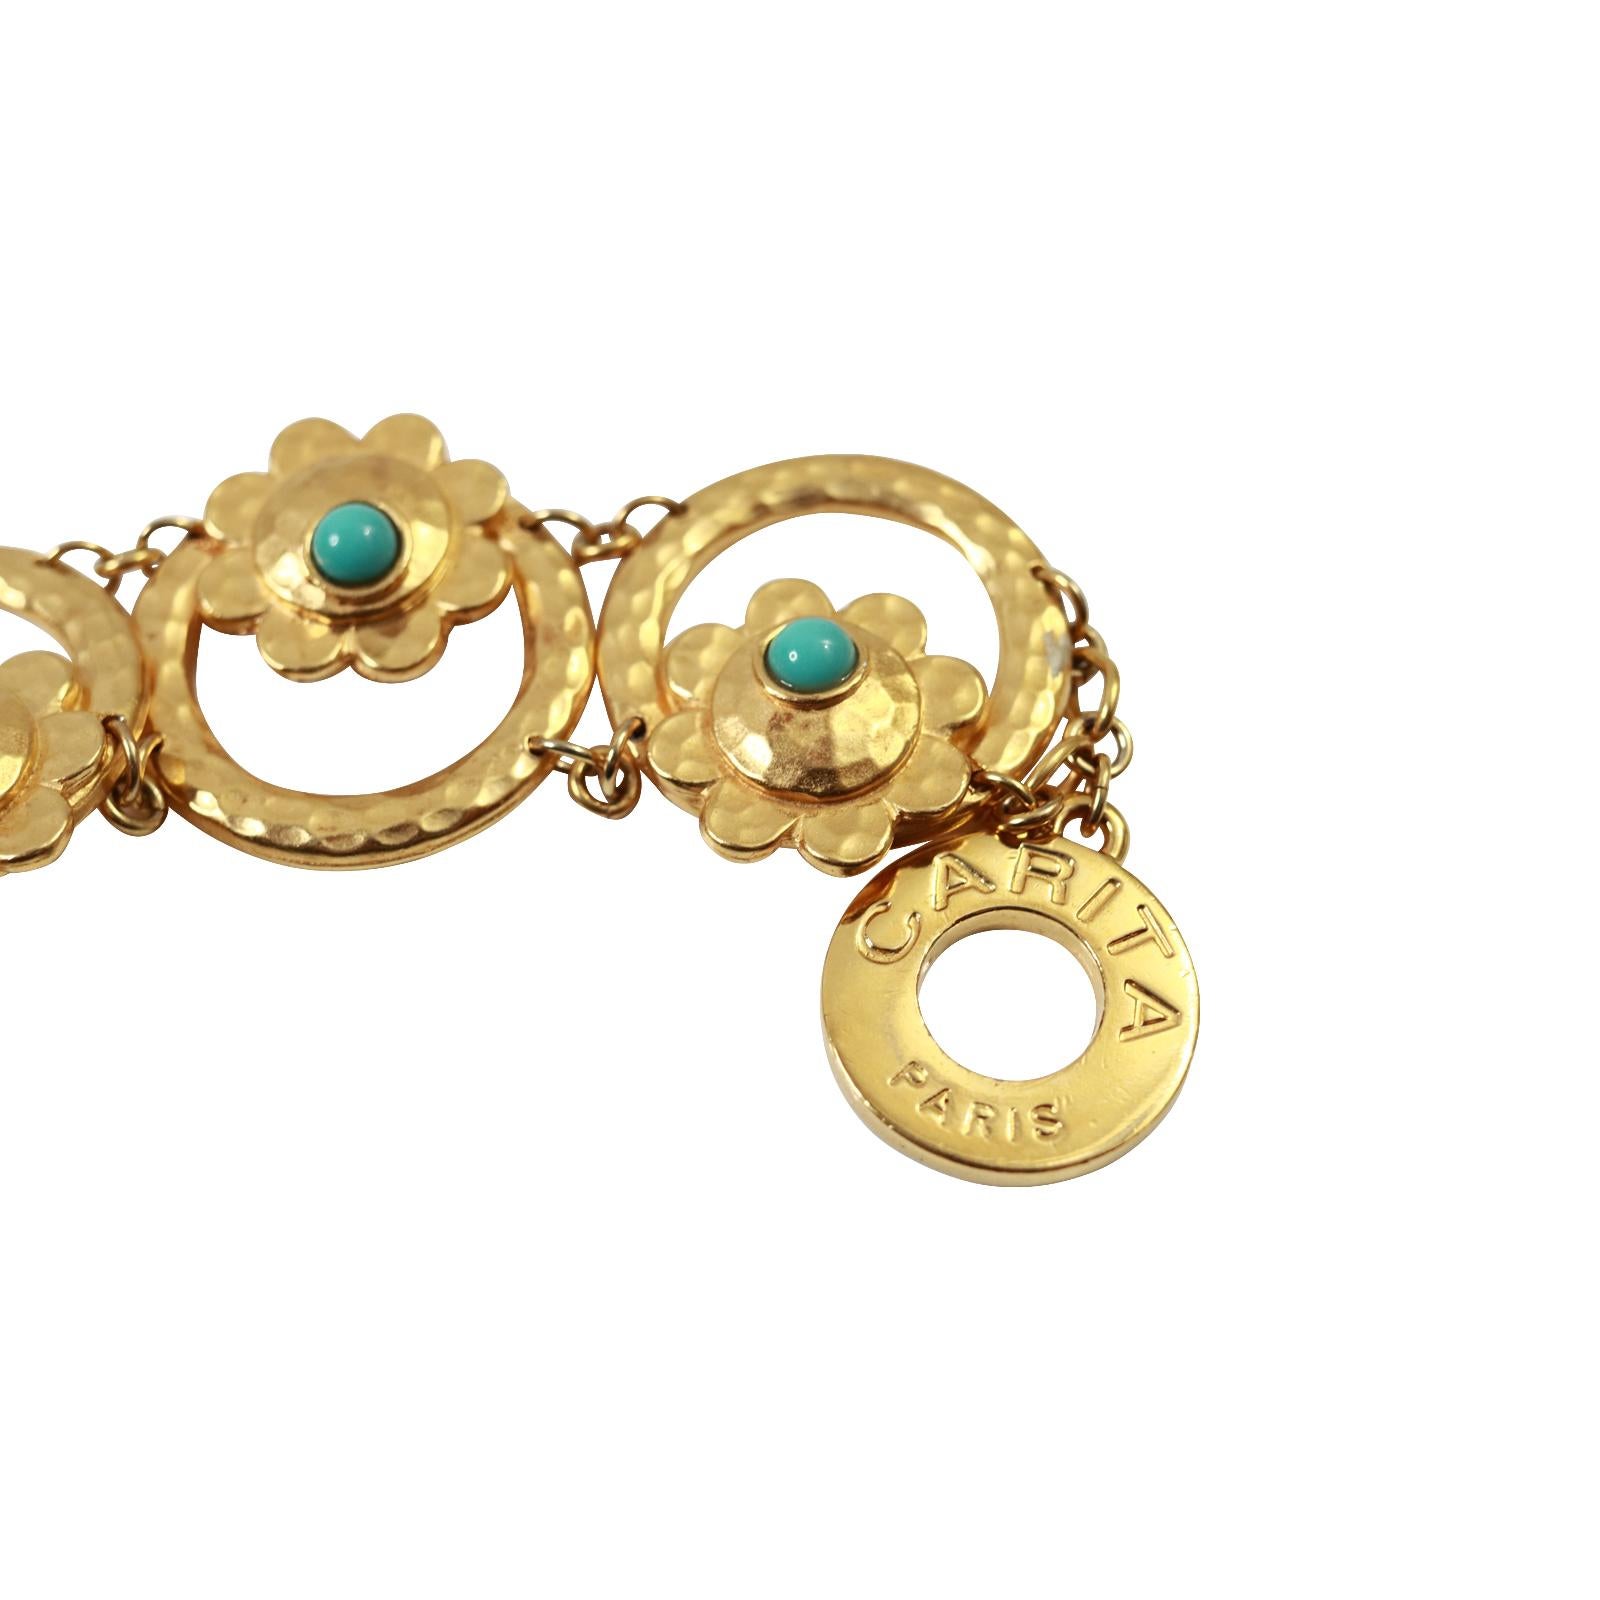 Vintage Carita Paris Gold Tone Bracelet Circa 1980s In Good Condition For Sale In New York, NY